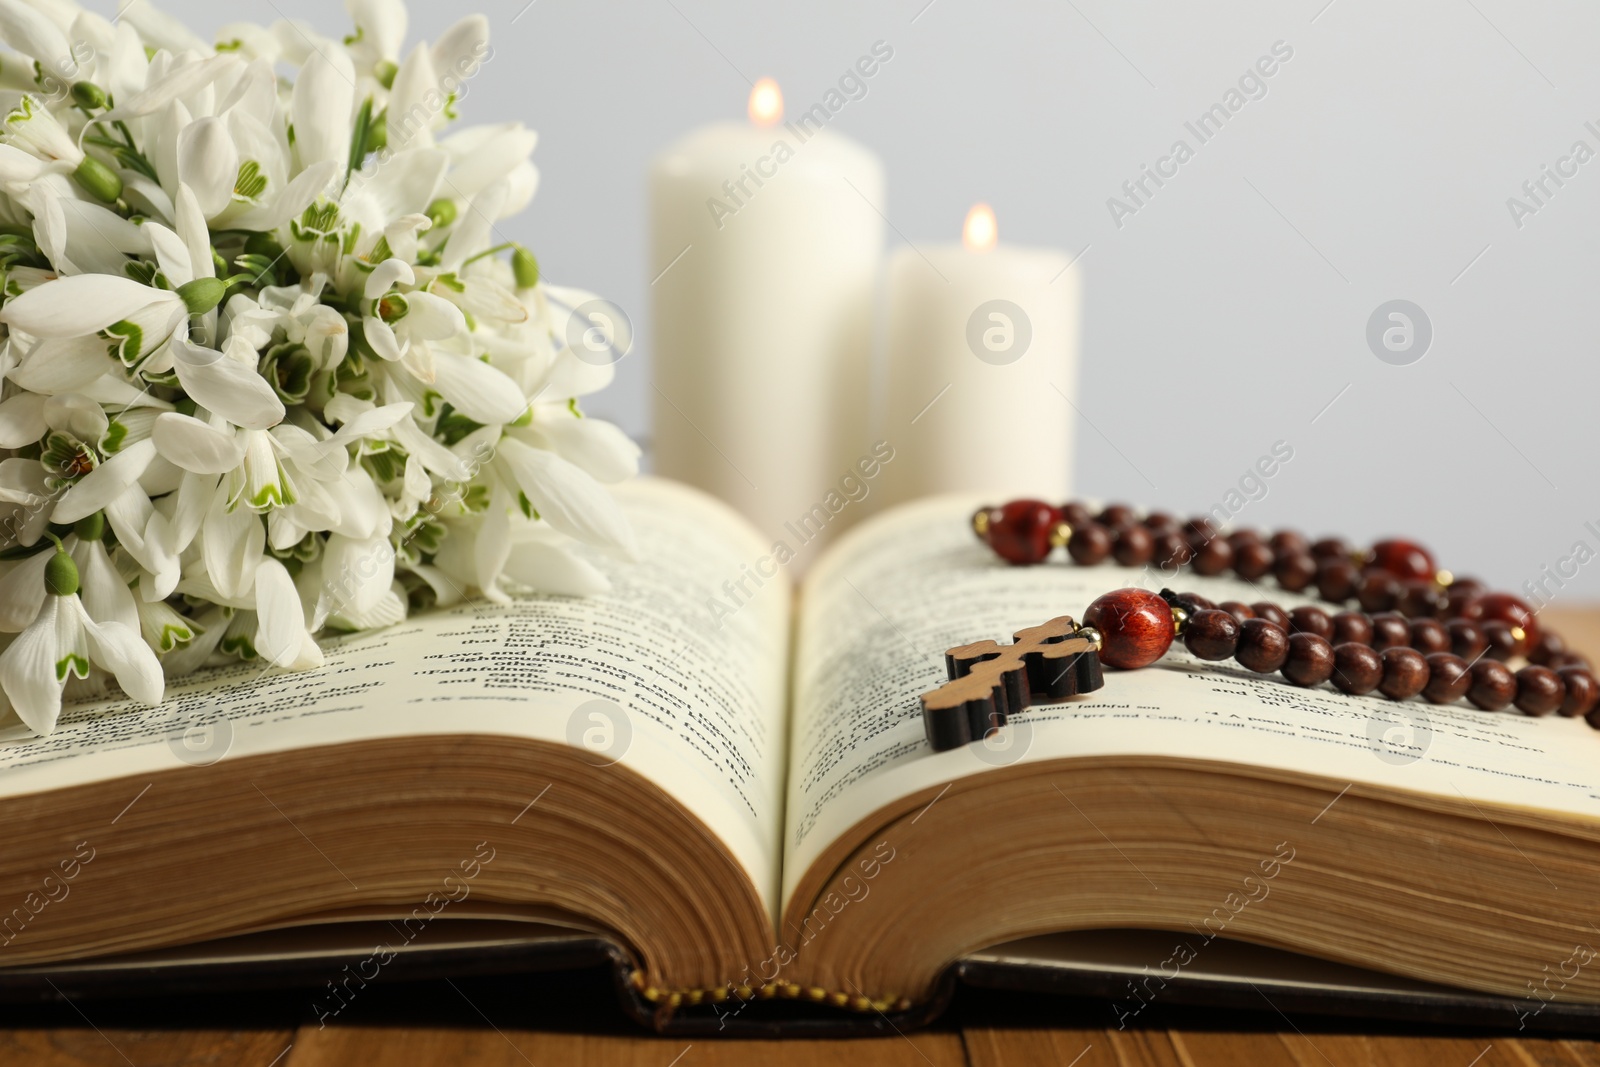 Photo of Bible, rosary beads, flowers and church candles on wooden table, closeup